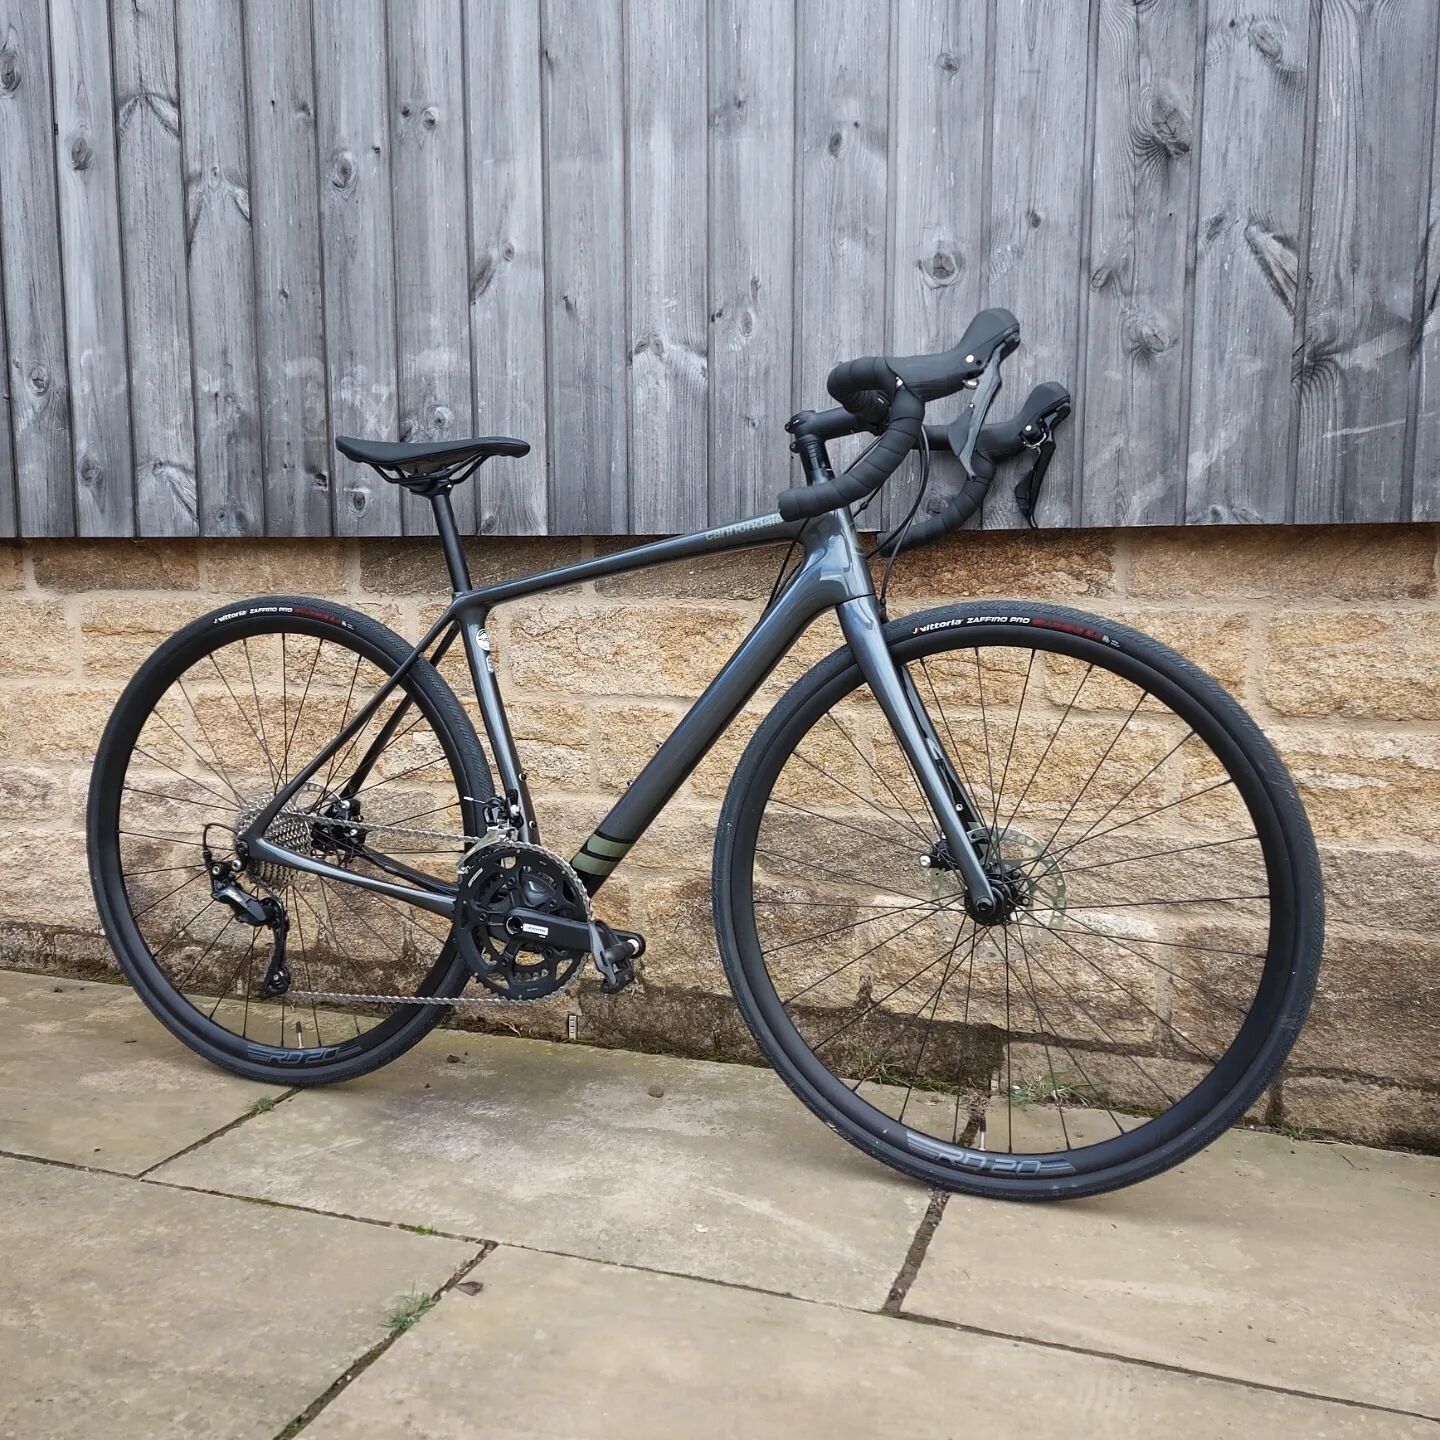 SYNAPSE SALE!

Save &pound;599 on our Cannondale Synapse Carbon 105 range, available in 51, 54, 56 &amp; 58cm.

Cyclescheme also applies!

Come see us or use the link below to purchase from our website for free nationwide delivery.

https://yorkshire